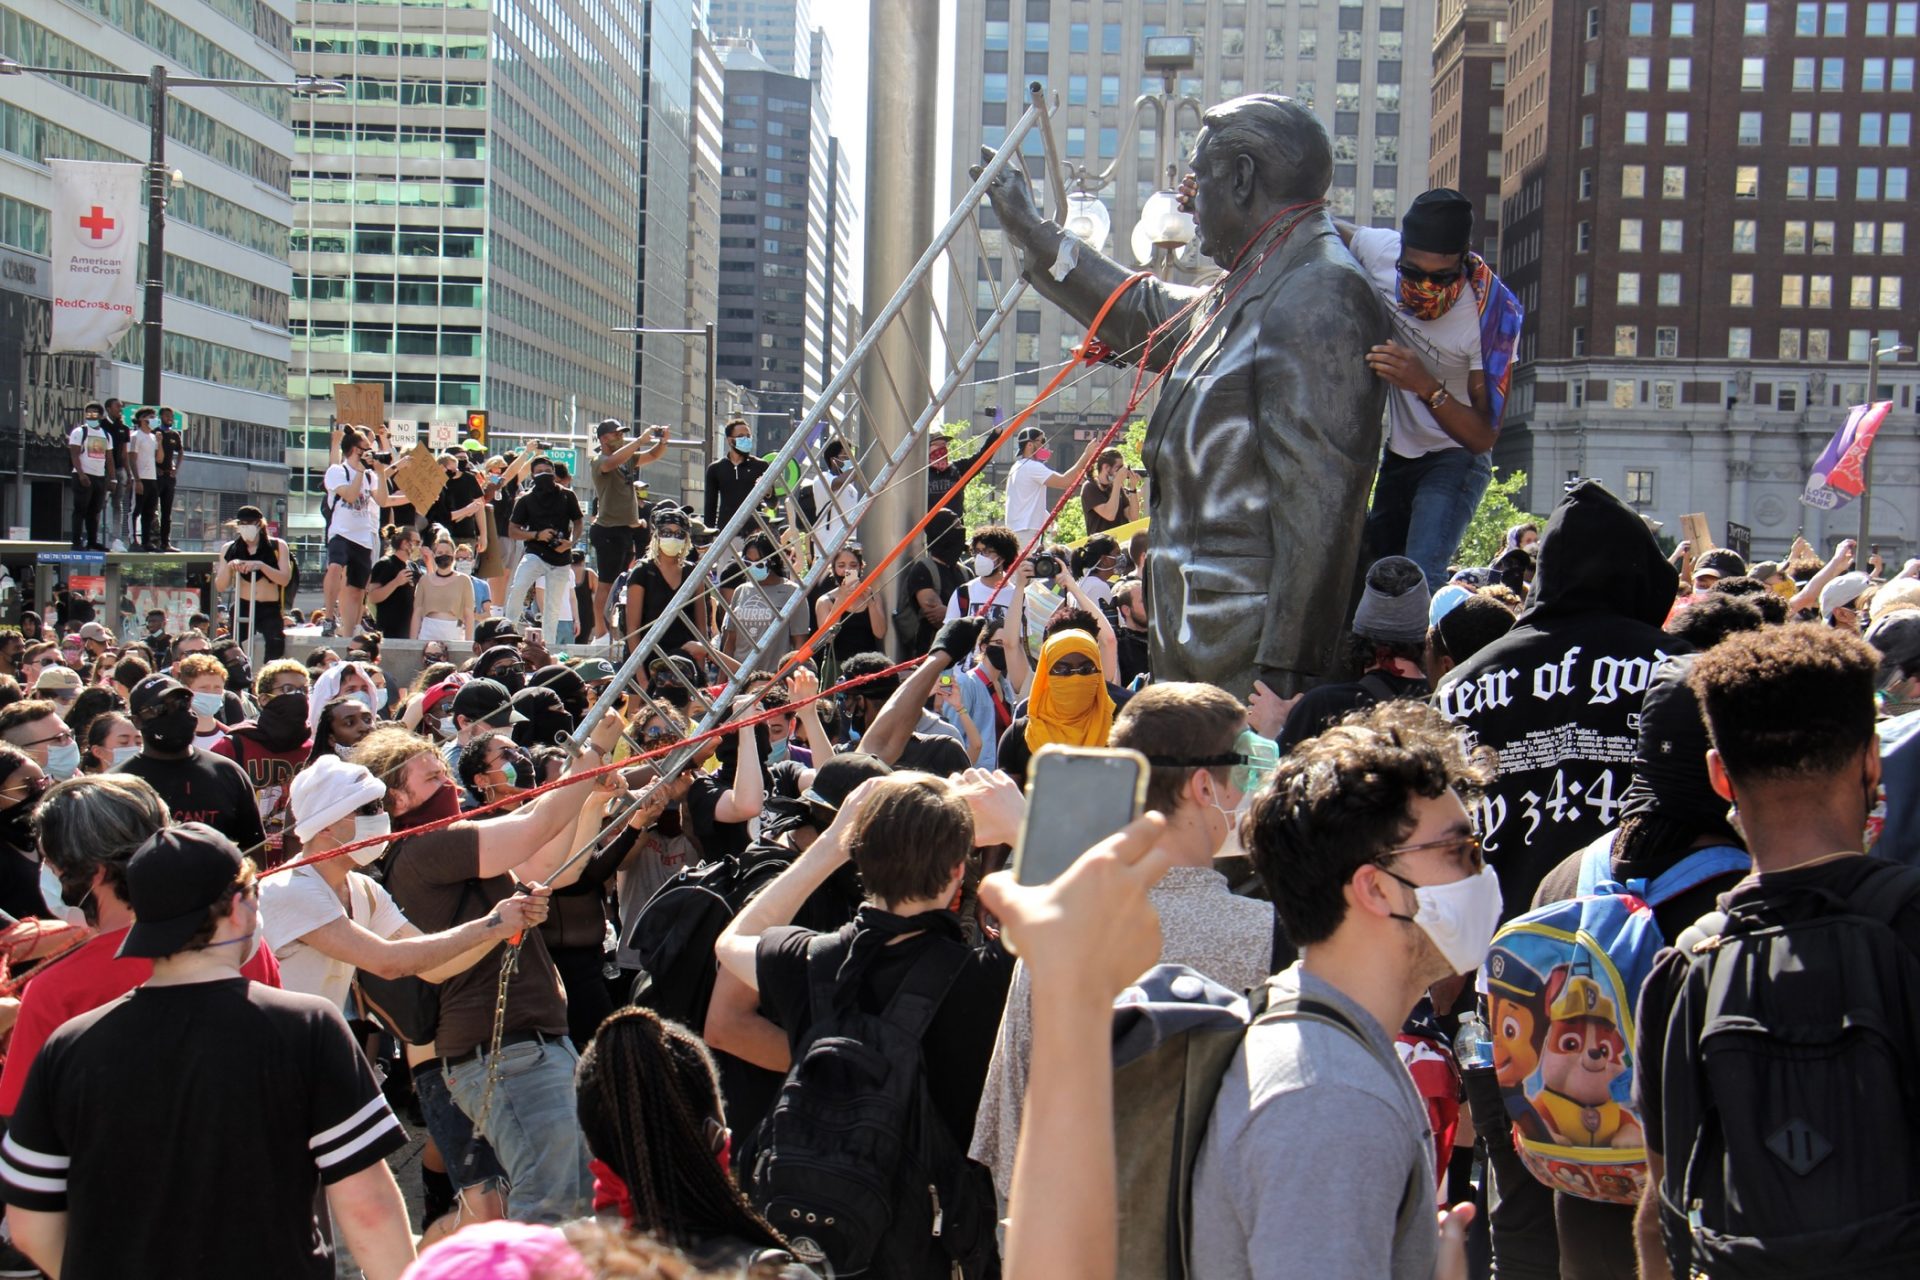 Protesters try to take down the statue of former mayor and police chief Frank Rizzo in front of the Municipal Services Building on May 30, 2020.